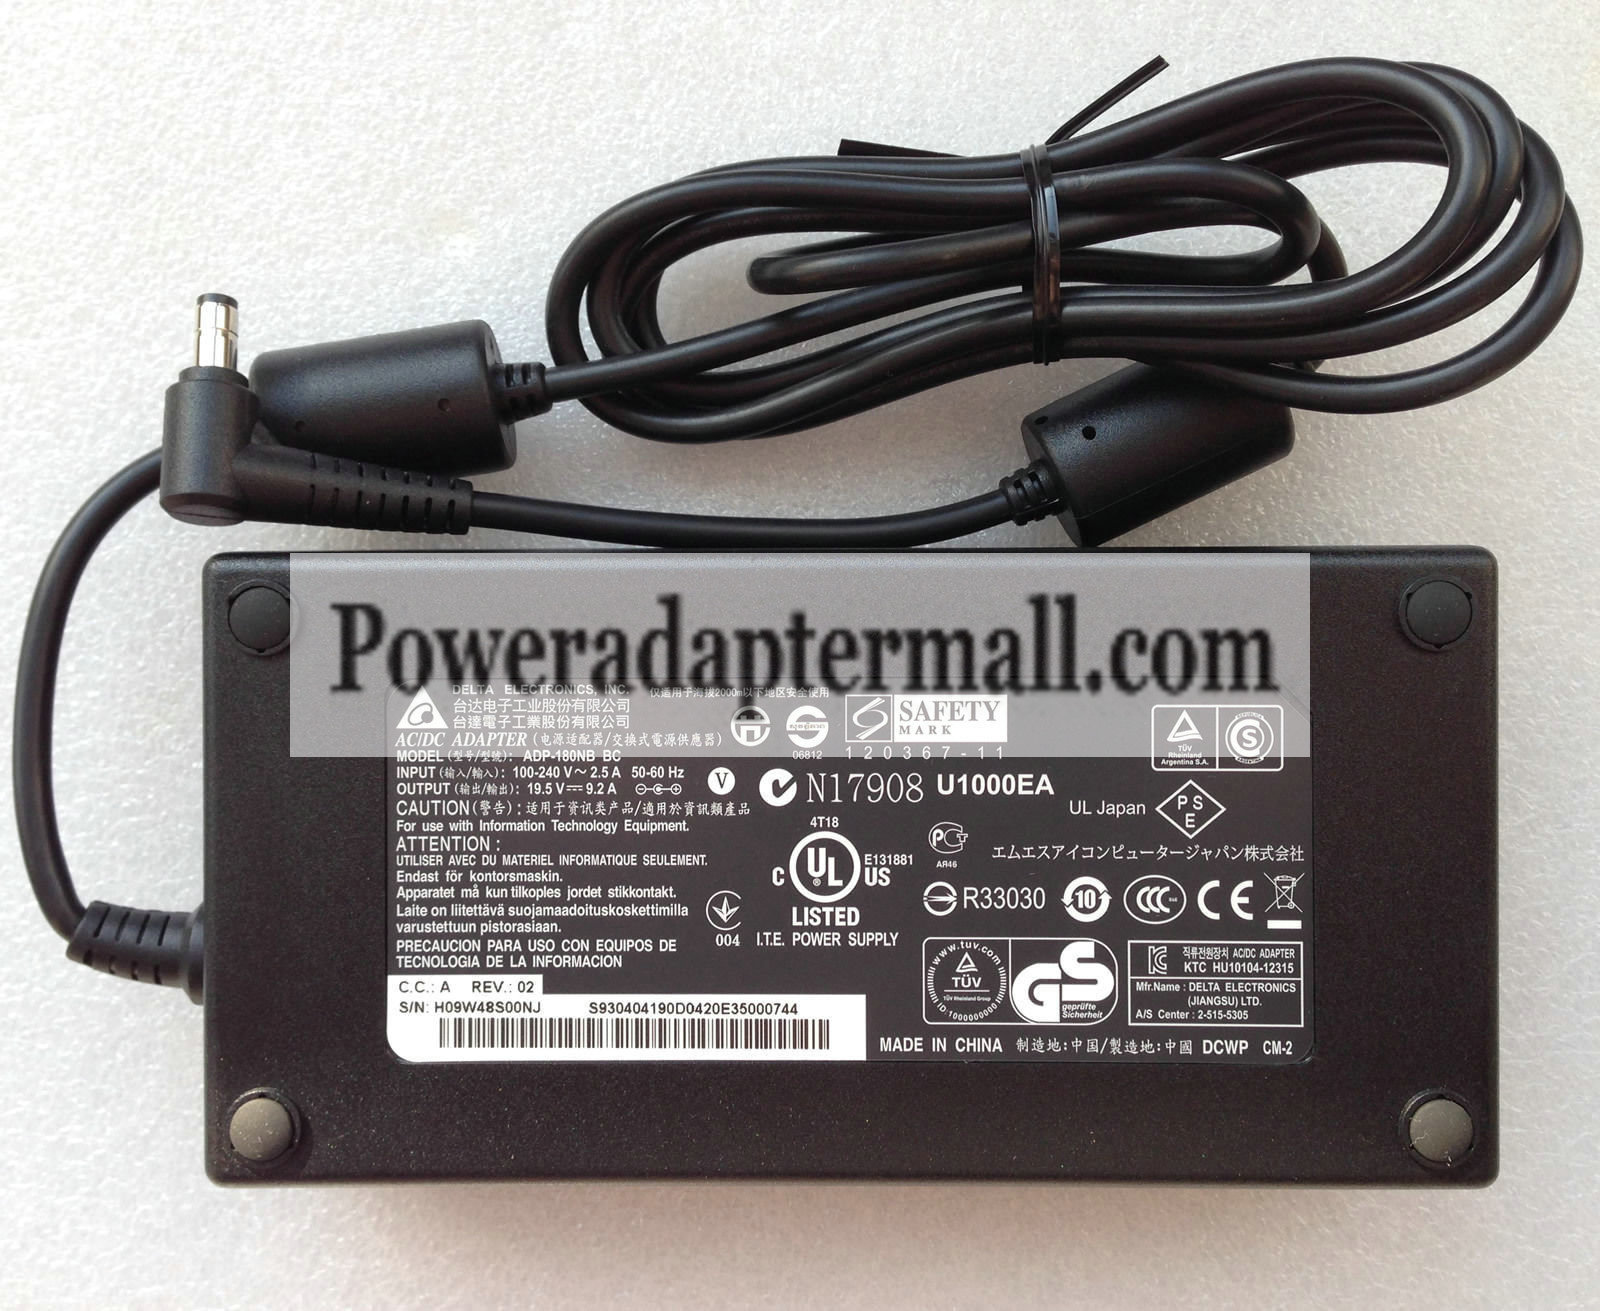 19.5V 9.2A 180W Clevo Terransforce P150EM AC Adapter Charger